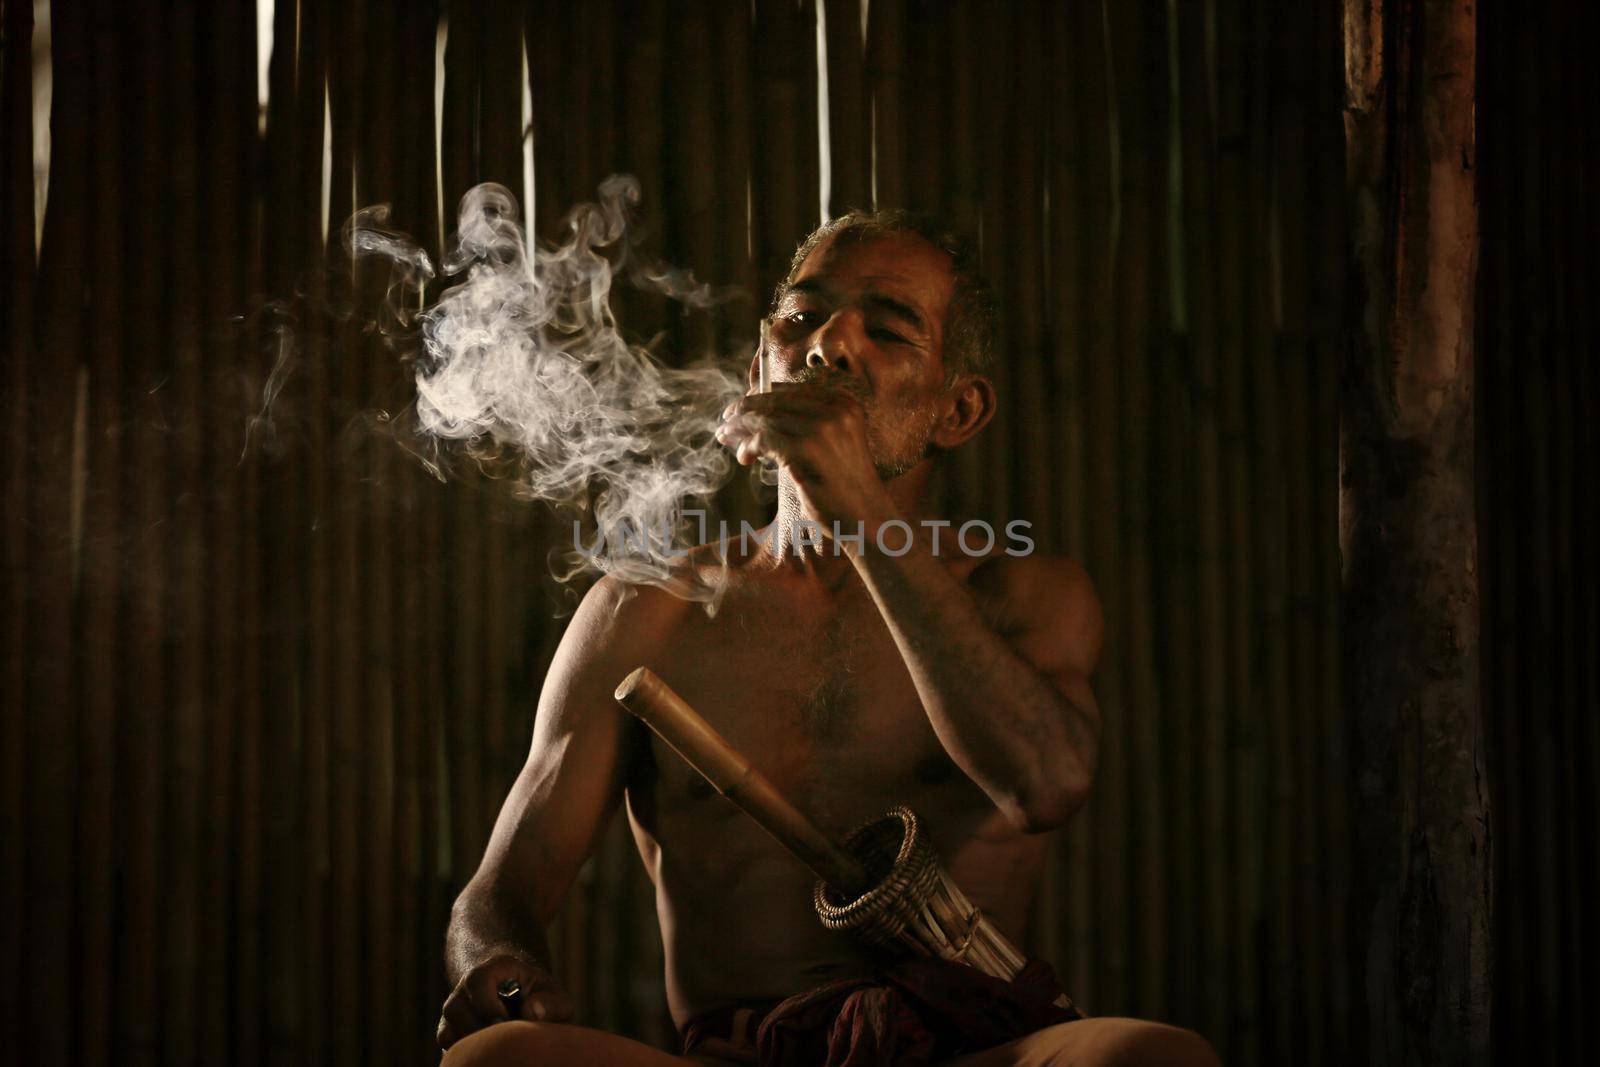 dark and sullen shot of a old man smoking over a black background